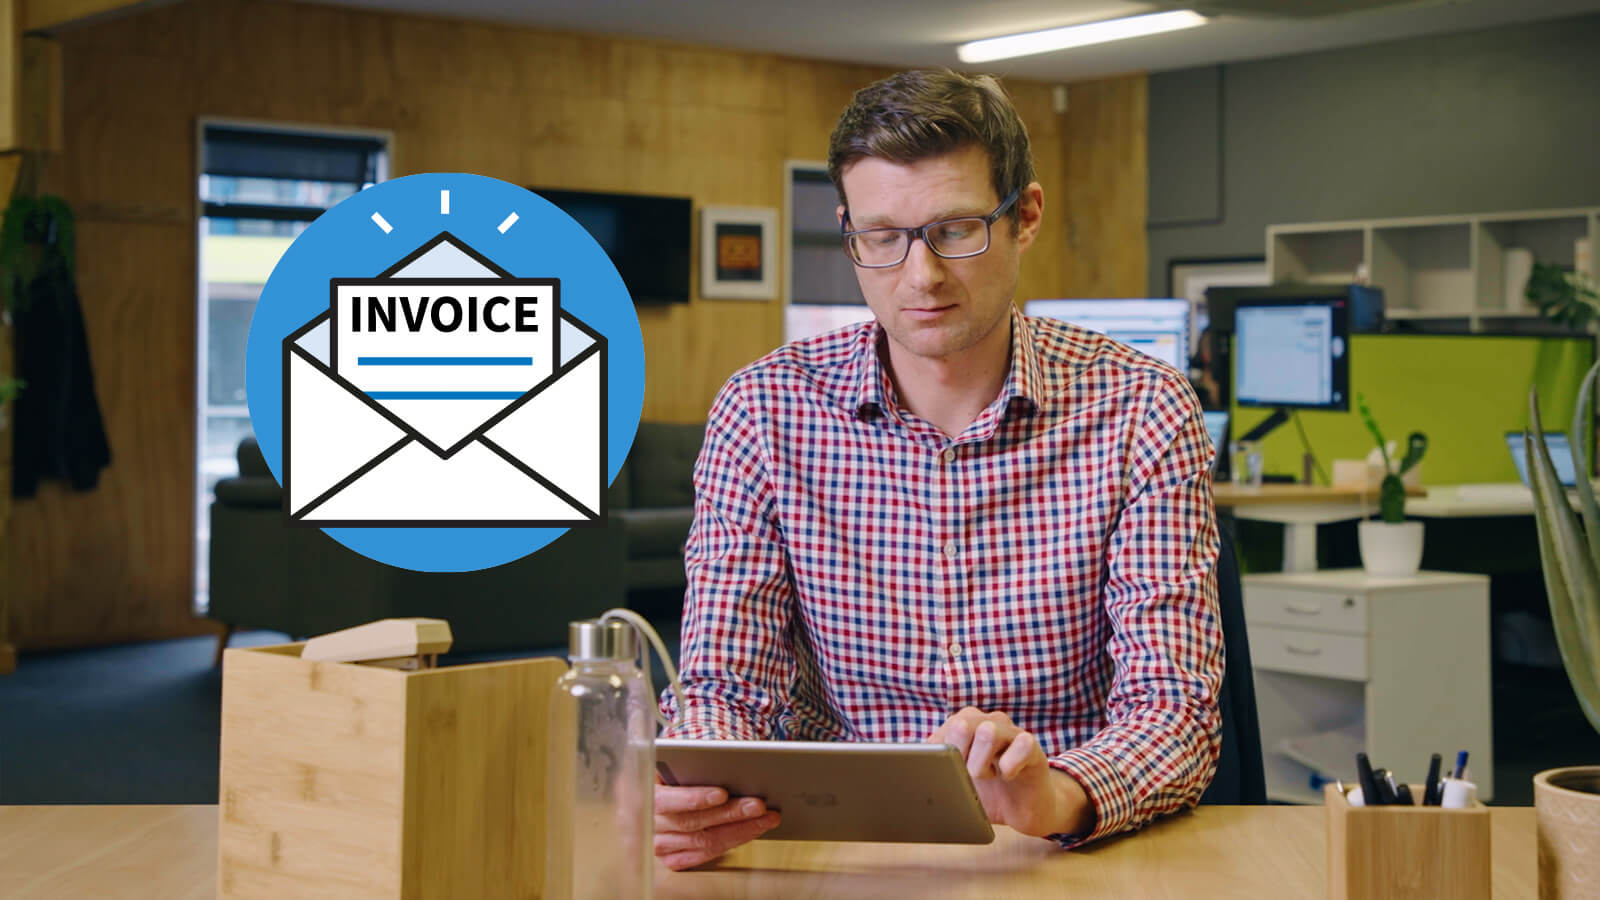 Invoice approval software